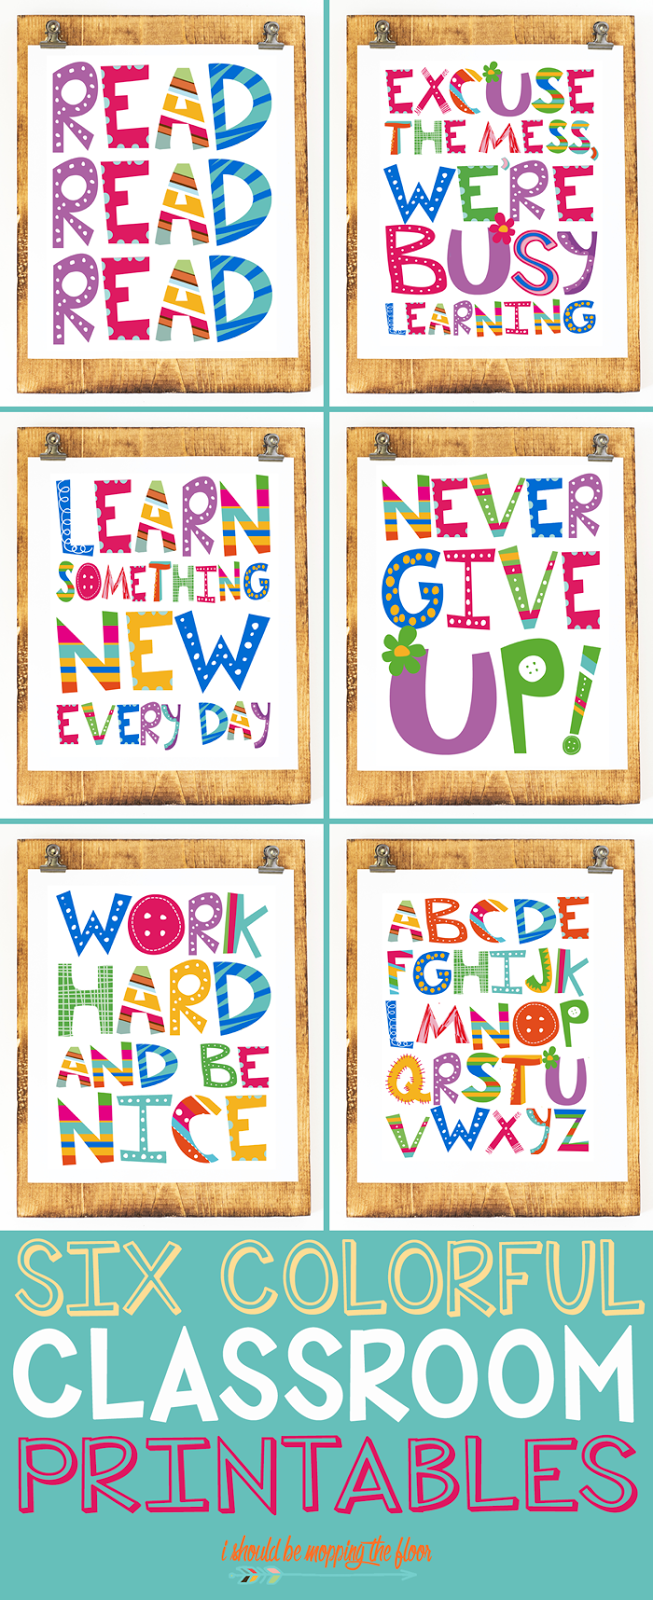 Six Colorful Classroom Printables | Grab these six fun prints for classroom and kids' decor (and more!).